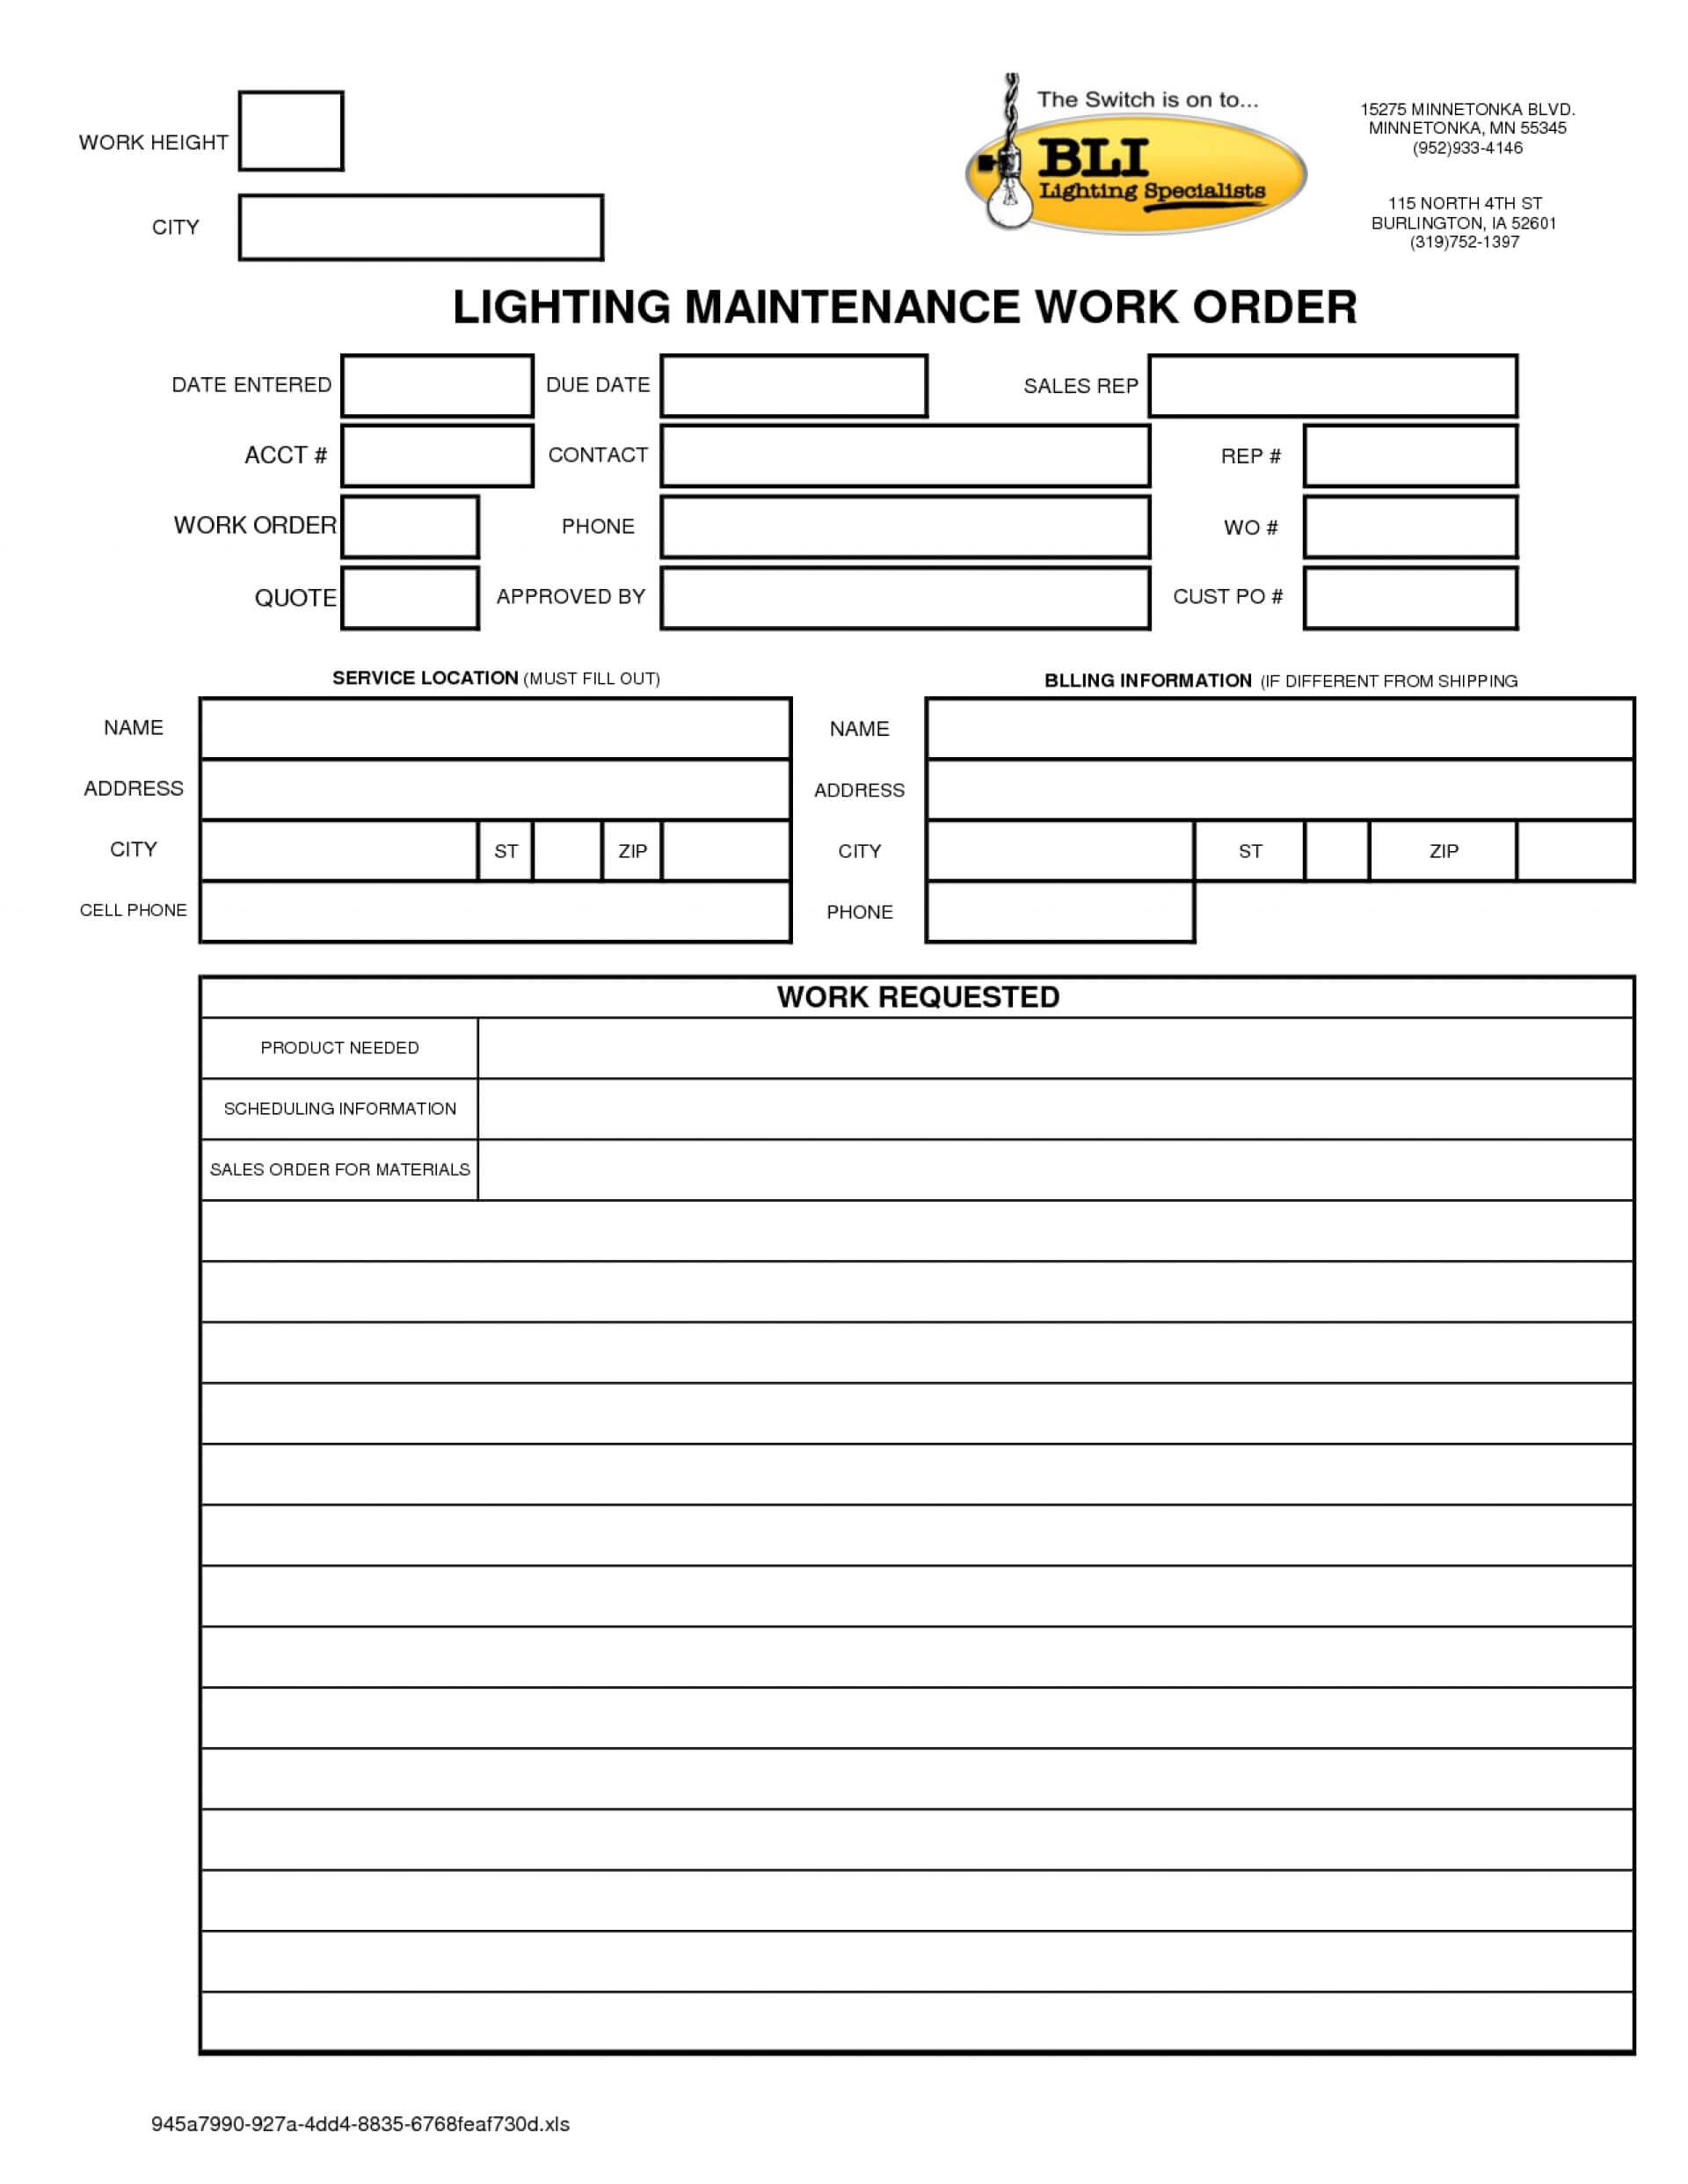 027 Maintenance Work Order Template Excel New Job Card Intended For Job Card Template Mechanic